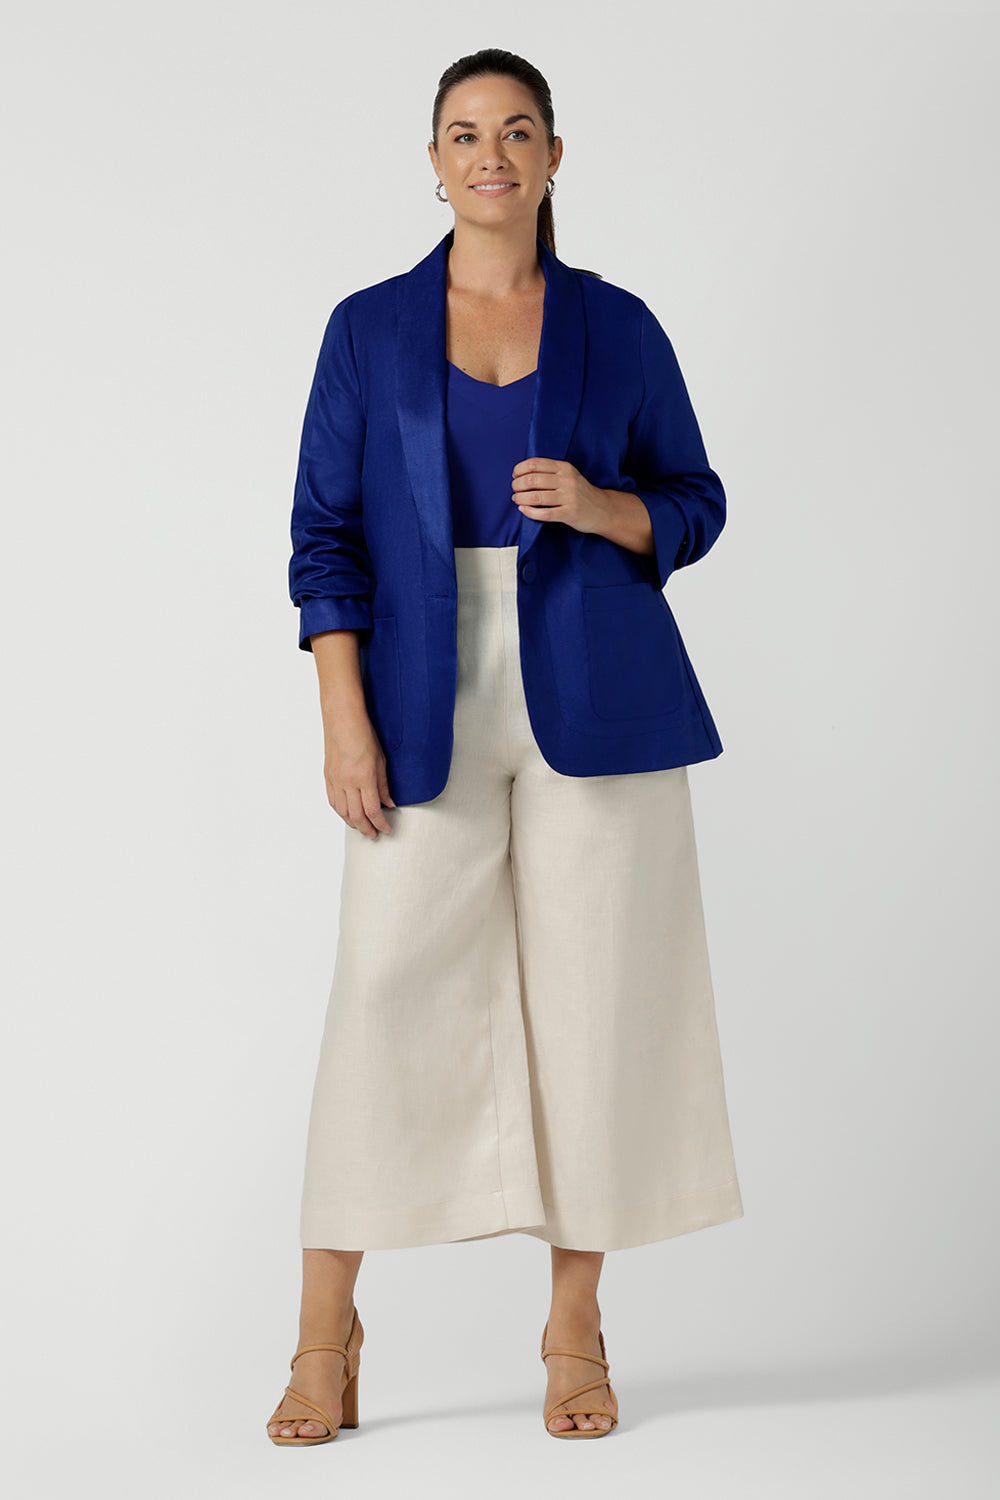 Houston Blazer in Cobalt Linen. Softly tailored in Linen with front pockets and a functioning button front. Made in Australia for women size 8 - 24. Styled back with Nik Pants in Parchment Linen and a Cobalt Eddy cami top.